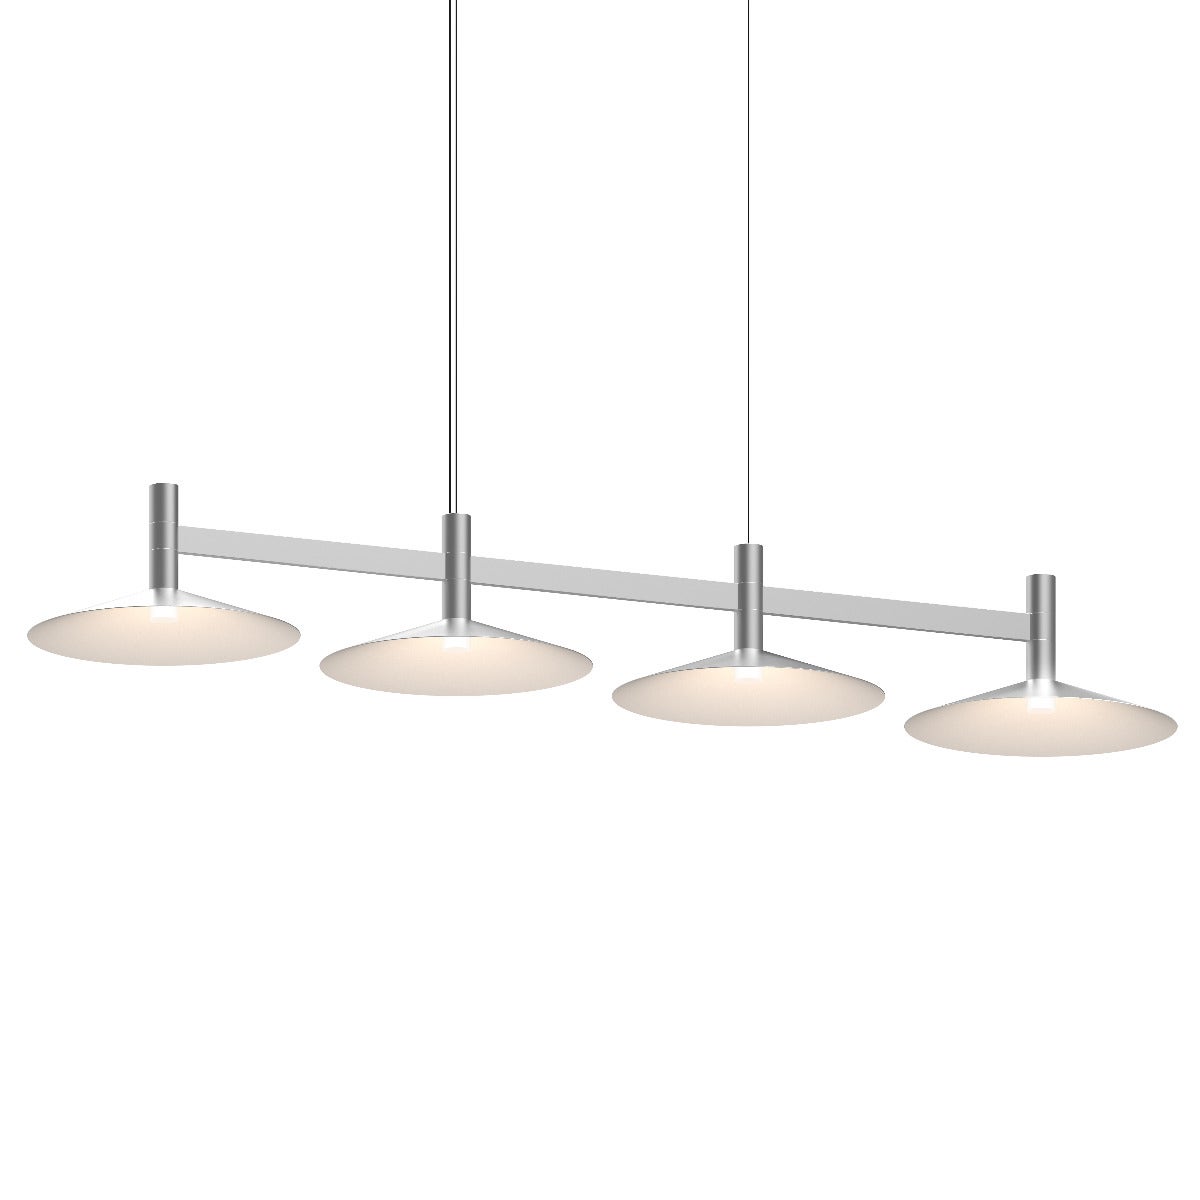 Sonneman Systema Staccato 4-Light Linear Pendant w/Shallow Cone Shades